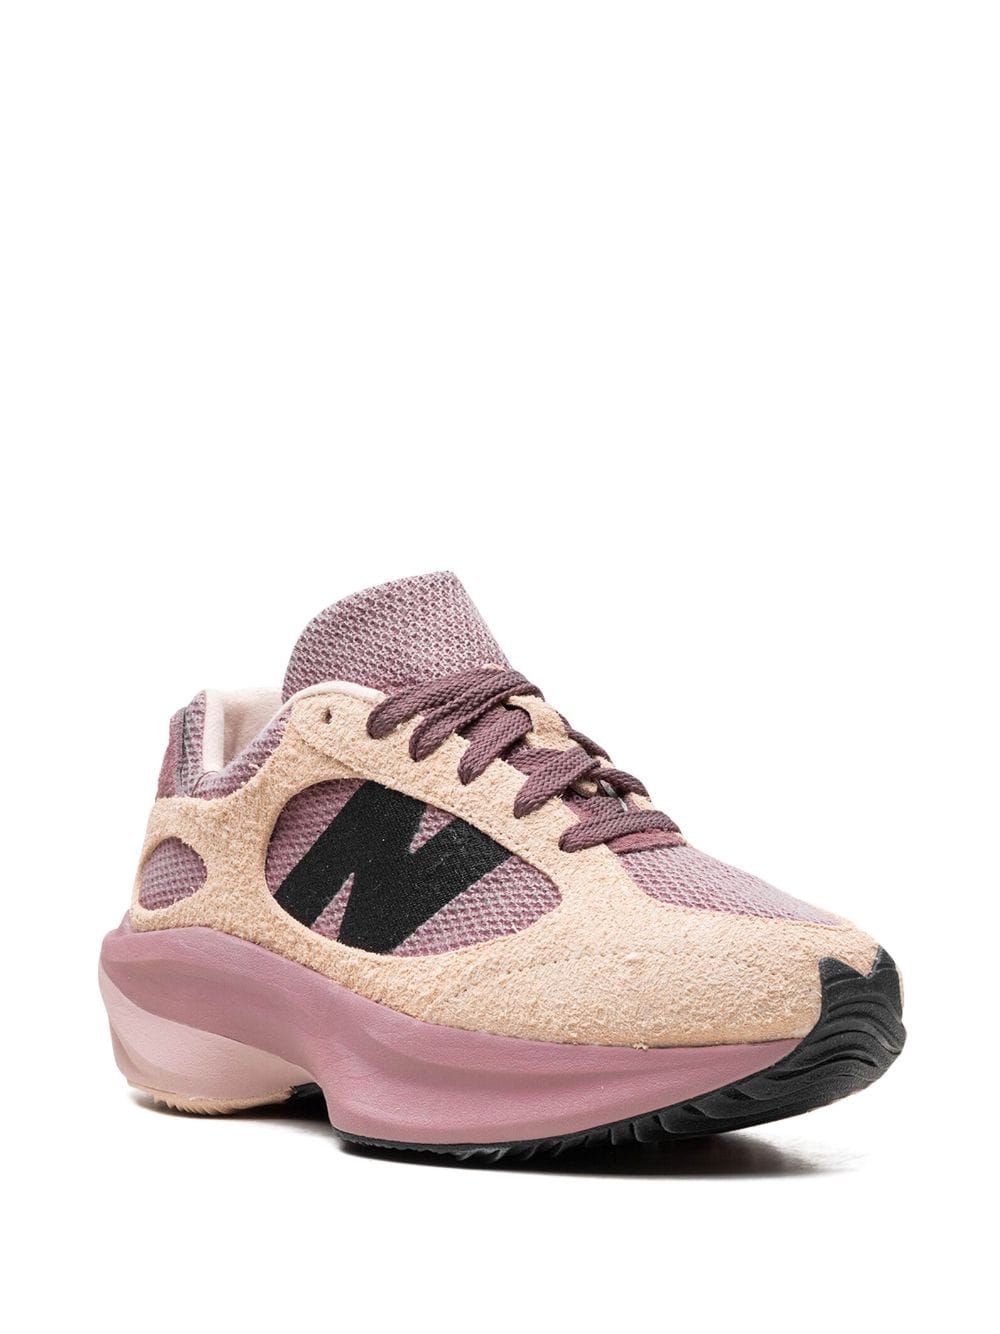 Image 2 of New Balance WRPD Runner "Pastel Pack" sneakers